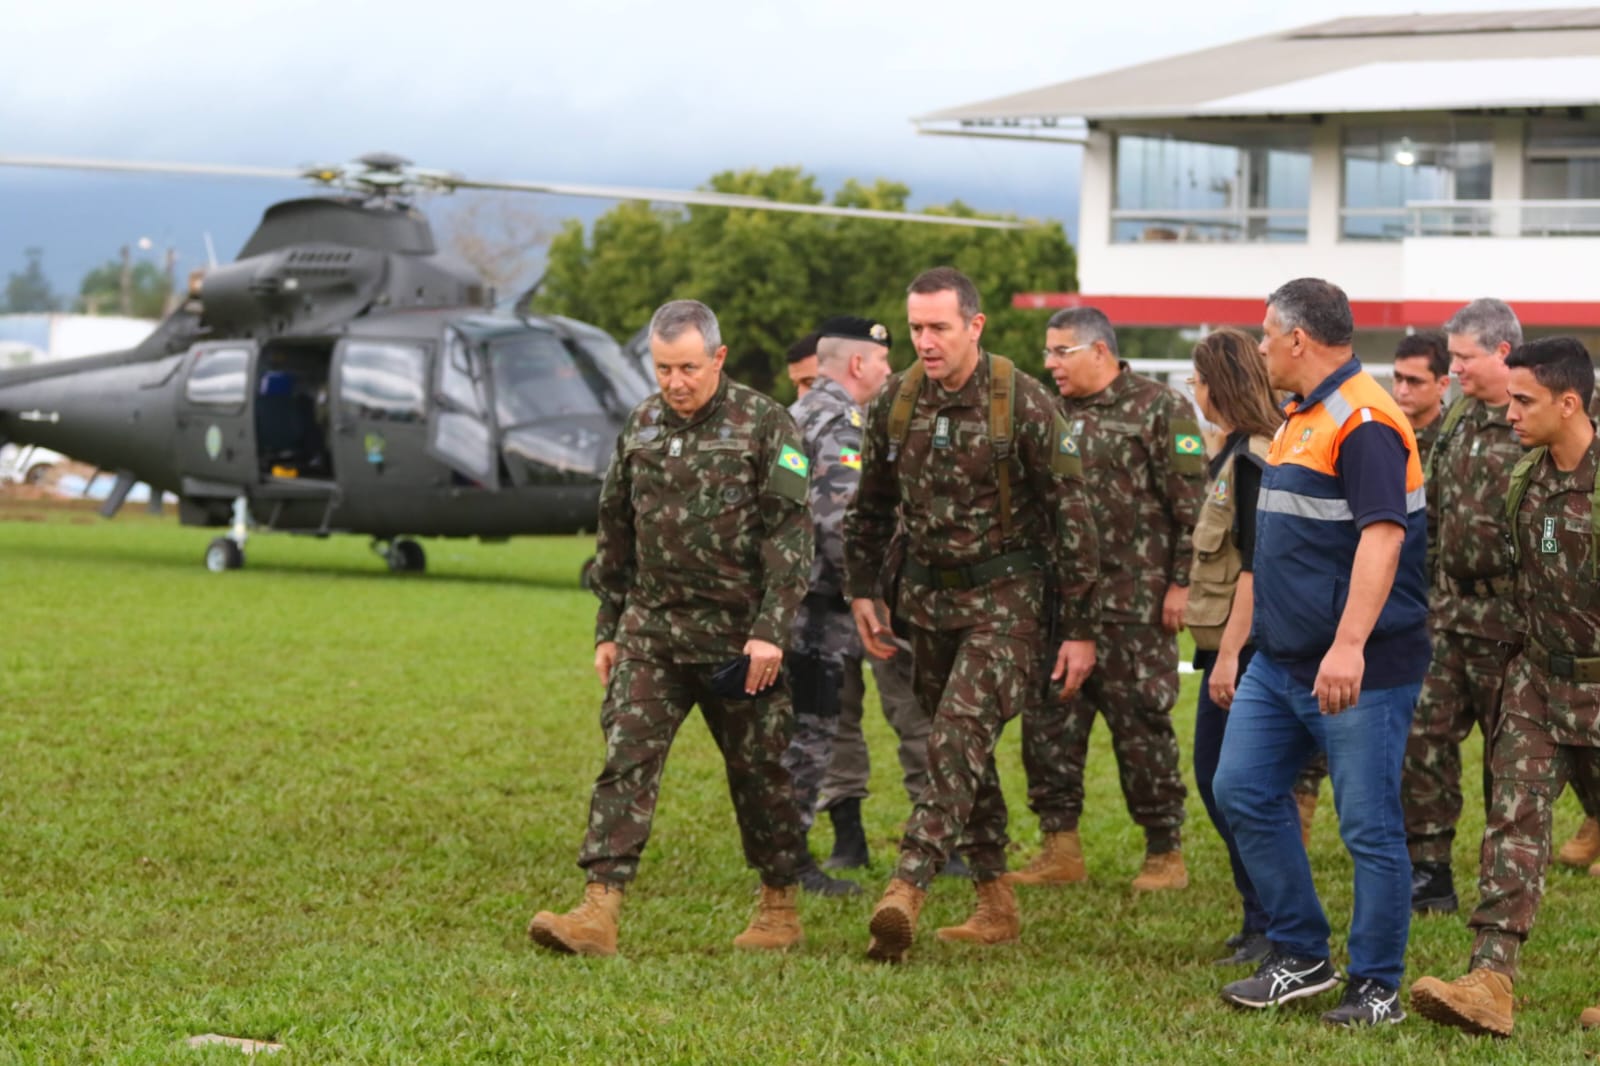 Troops' actions in support of the population of Rio Grande do Sul are accompanied by the Army Commander